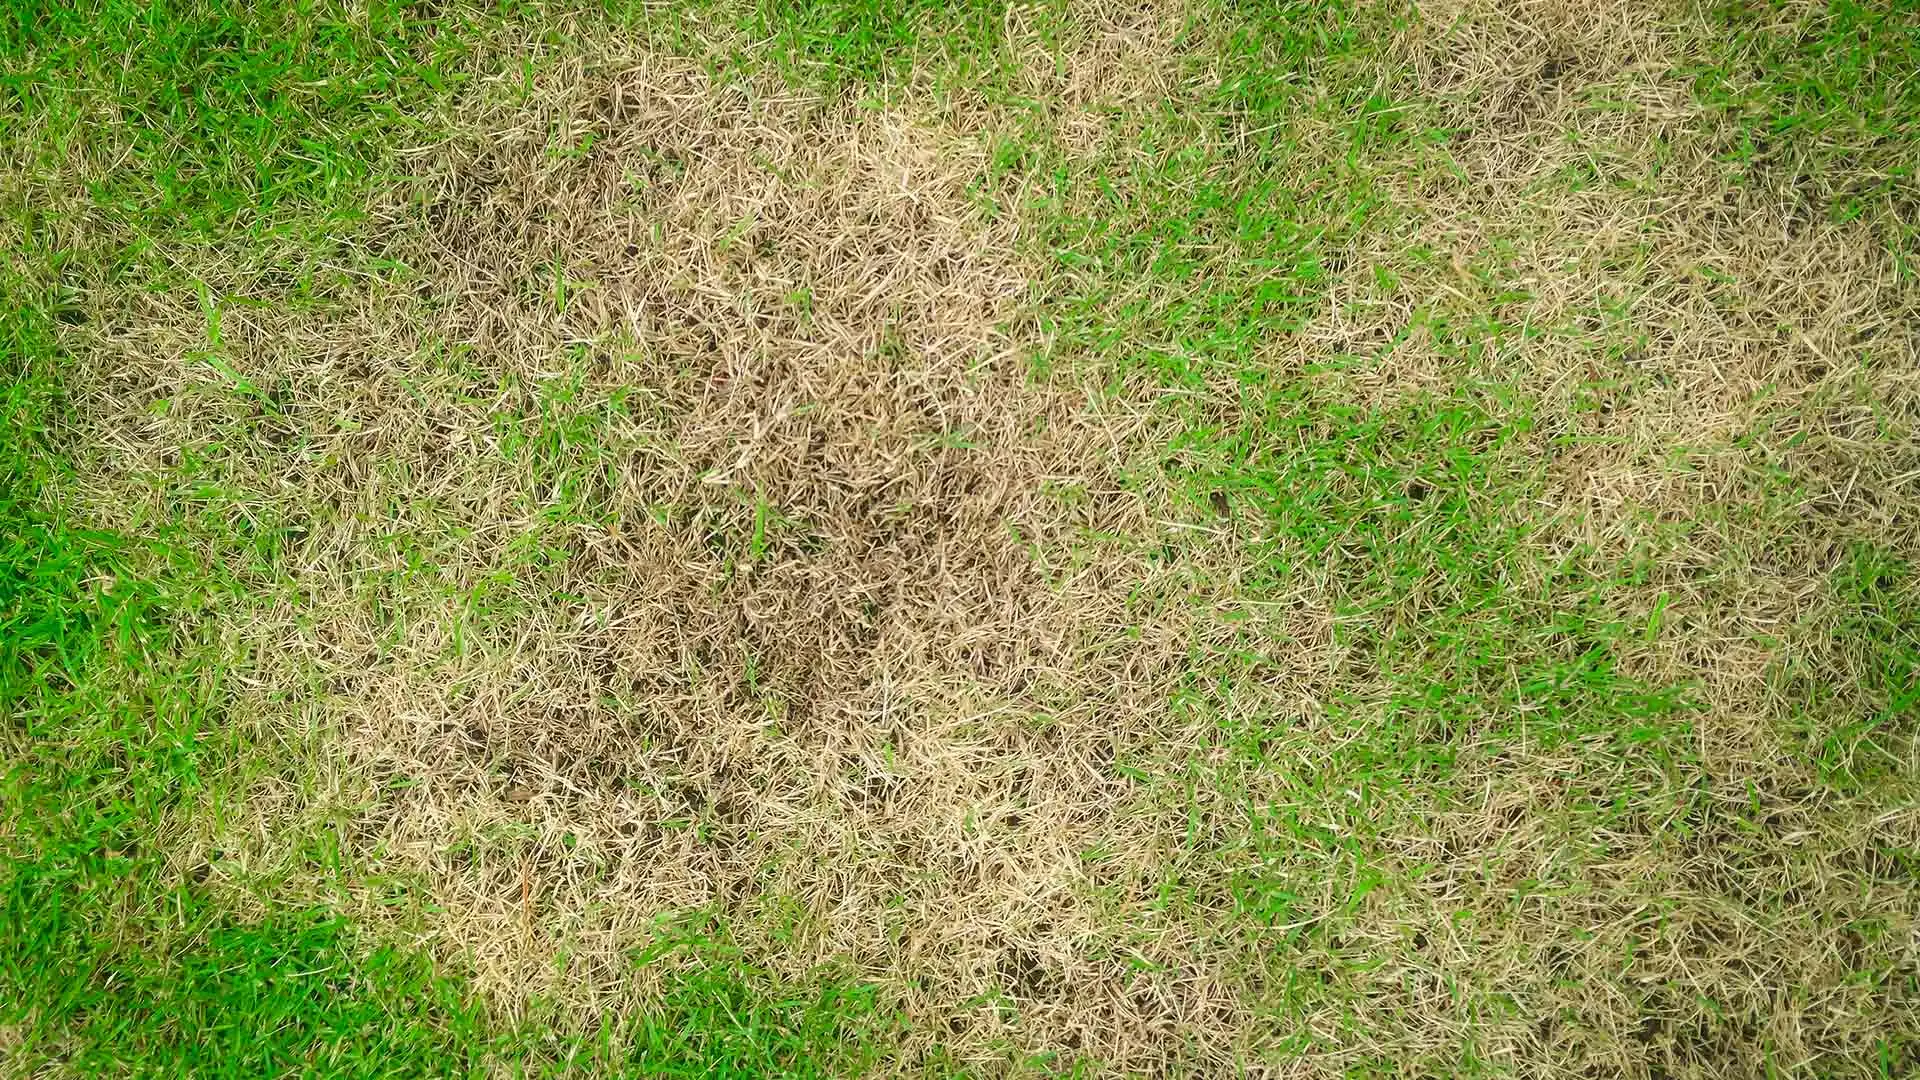 Do You Suspect Your Lawn Is Suffering From Brown Patch? Here’s What to Do